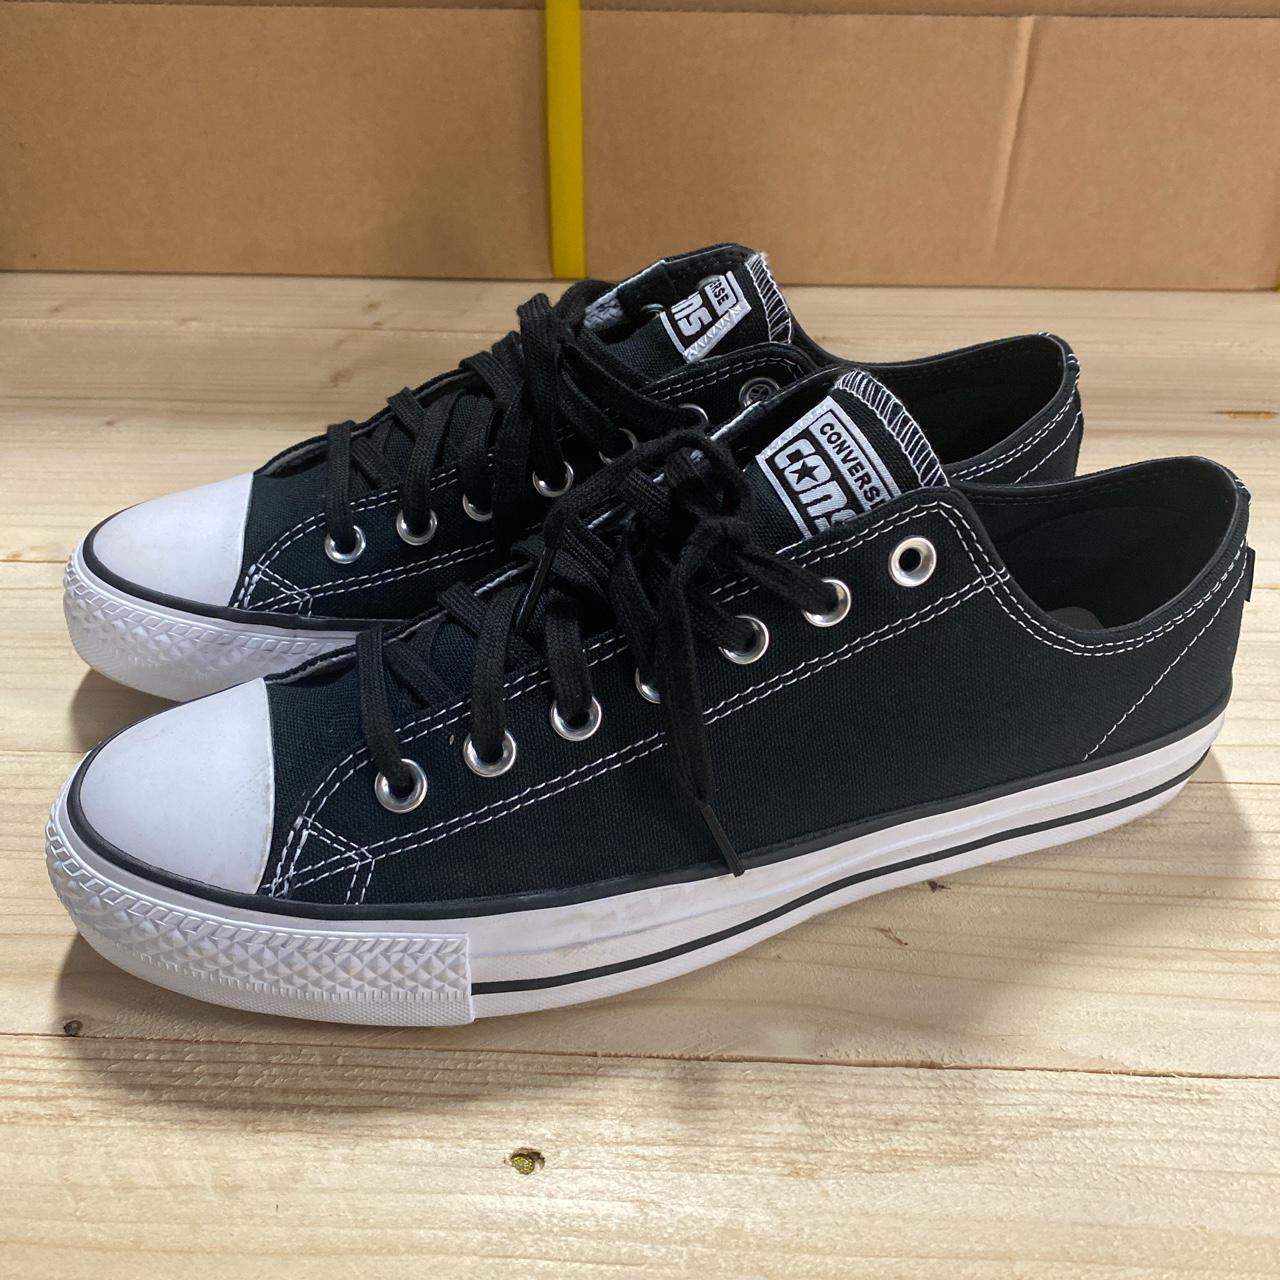 Converse Men's Black and White Trainers (2)